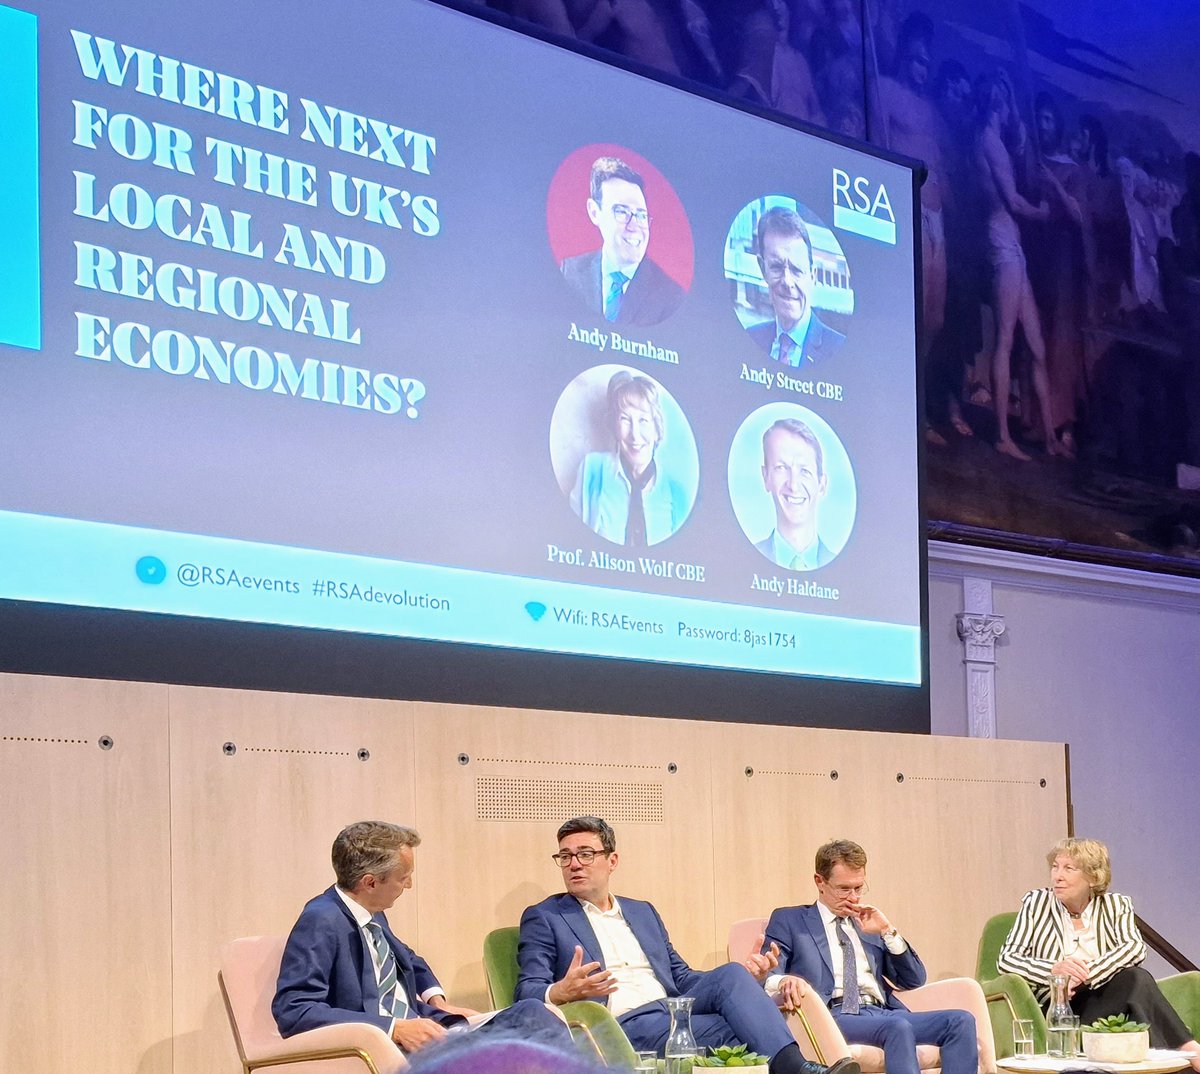 'The race to net zero can only be won bottom up' @AndyBurnhamGM as @andy4wm calls out unique ability for devolution to deliver the retrofit needed. Net zero focus critical for our region with the global transition to the new economy #RSAdevolution